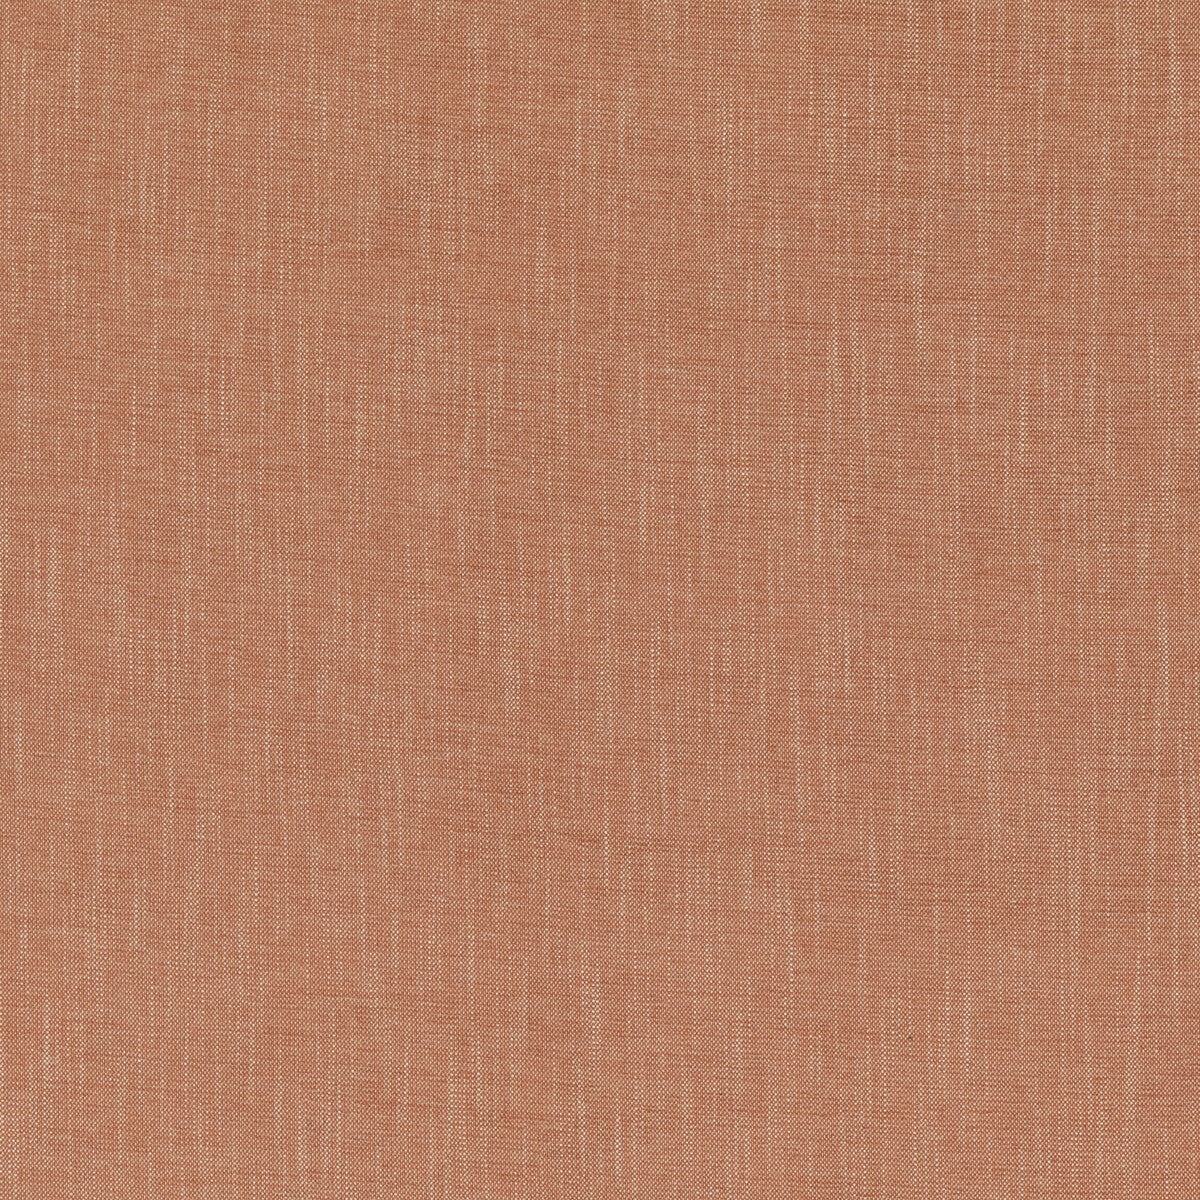 Ramble fabric in spice color - pattern PF50485.330.0 - by Baker Lifestyle in the Block Weaves collection